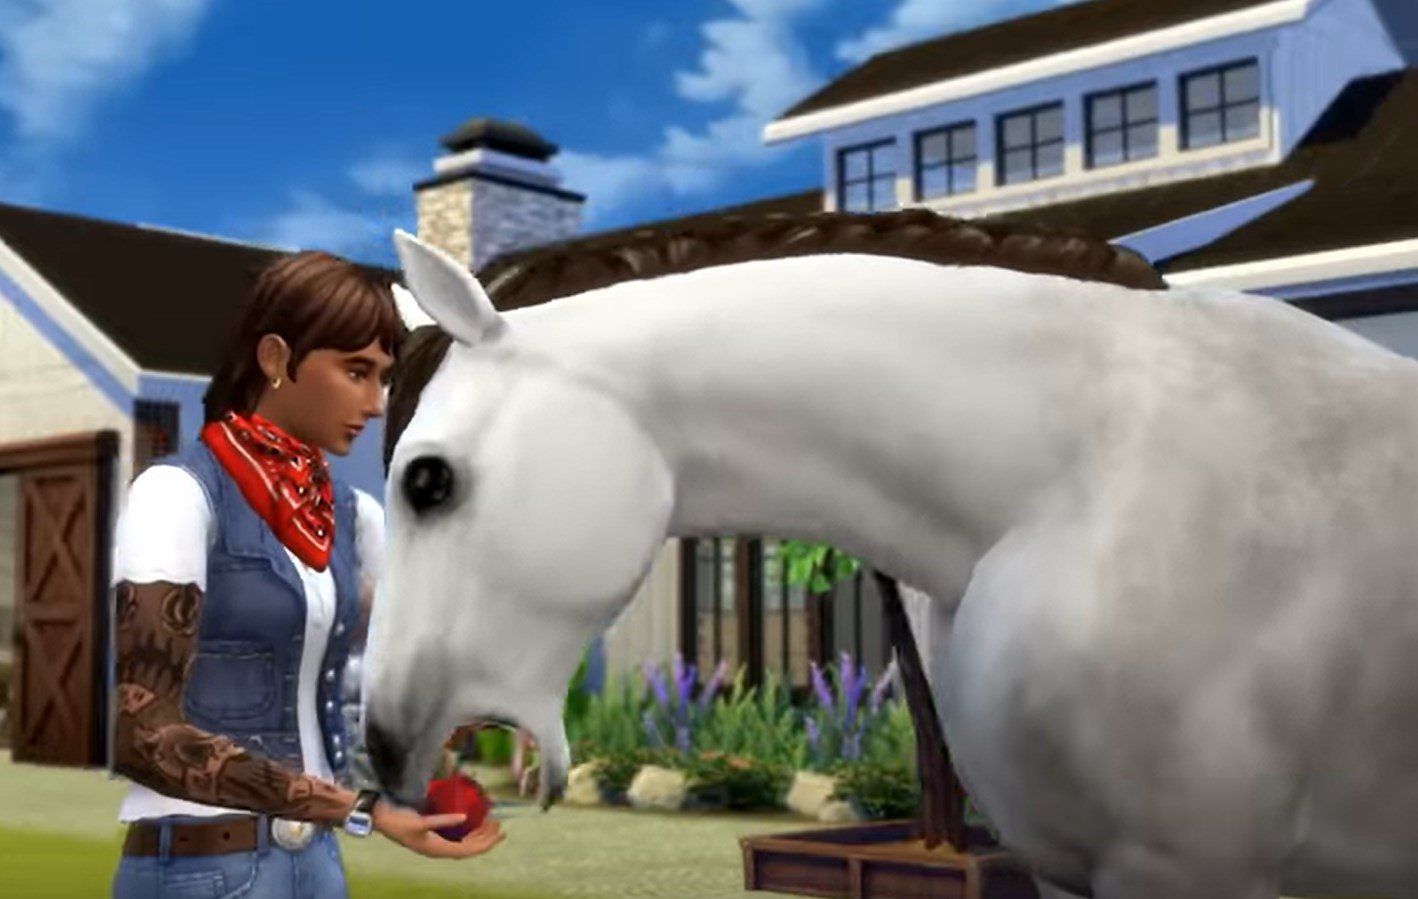 The Sims 4 Horse Ranch Expansion Pack: Official Reveal Trailer 